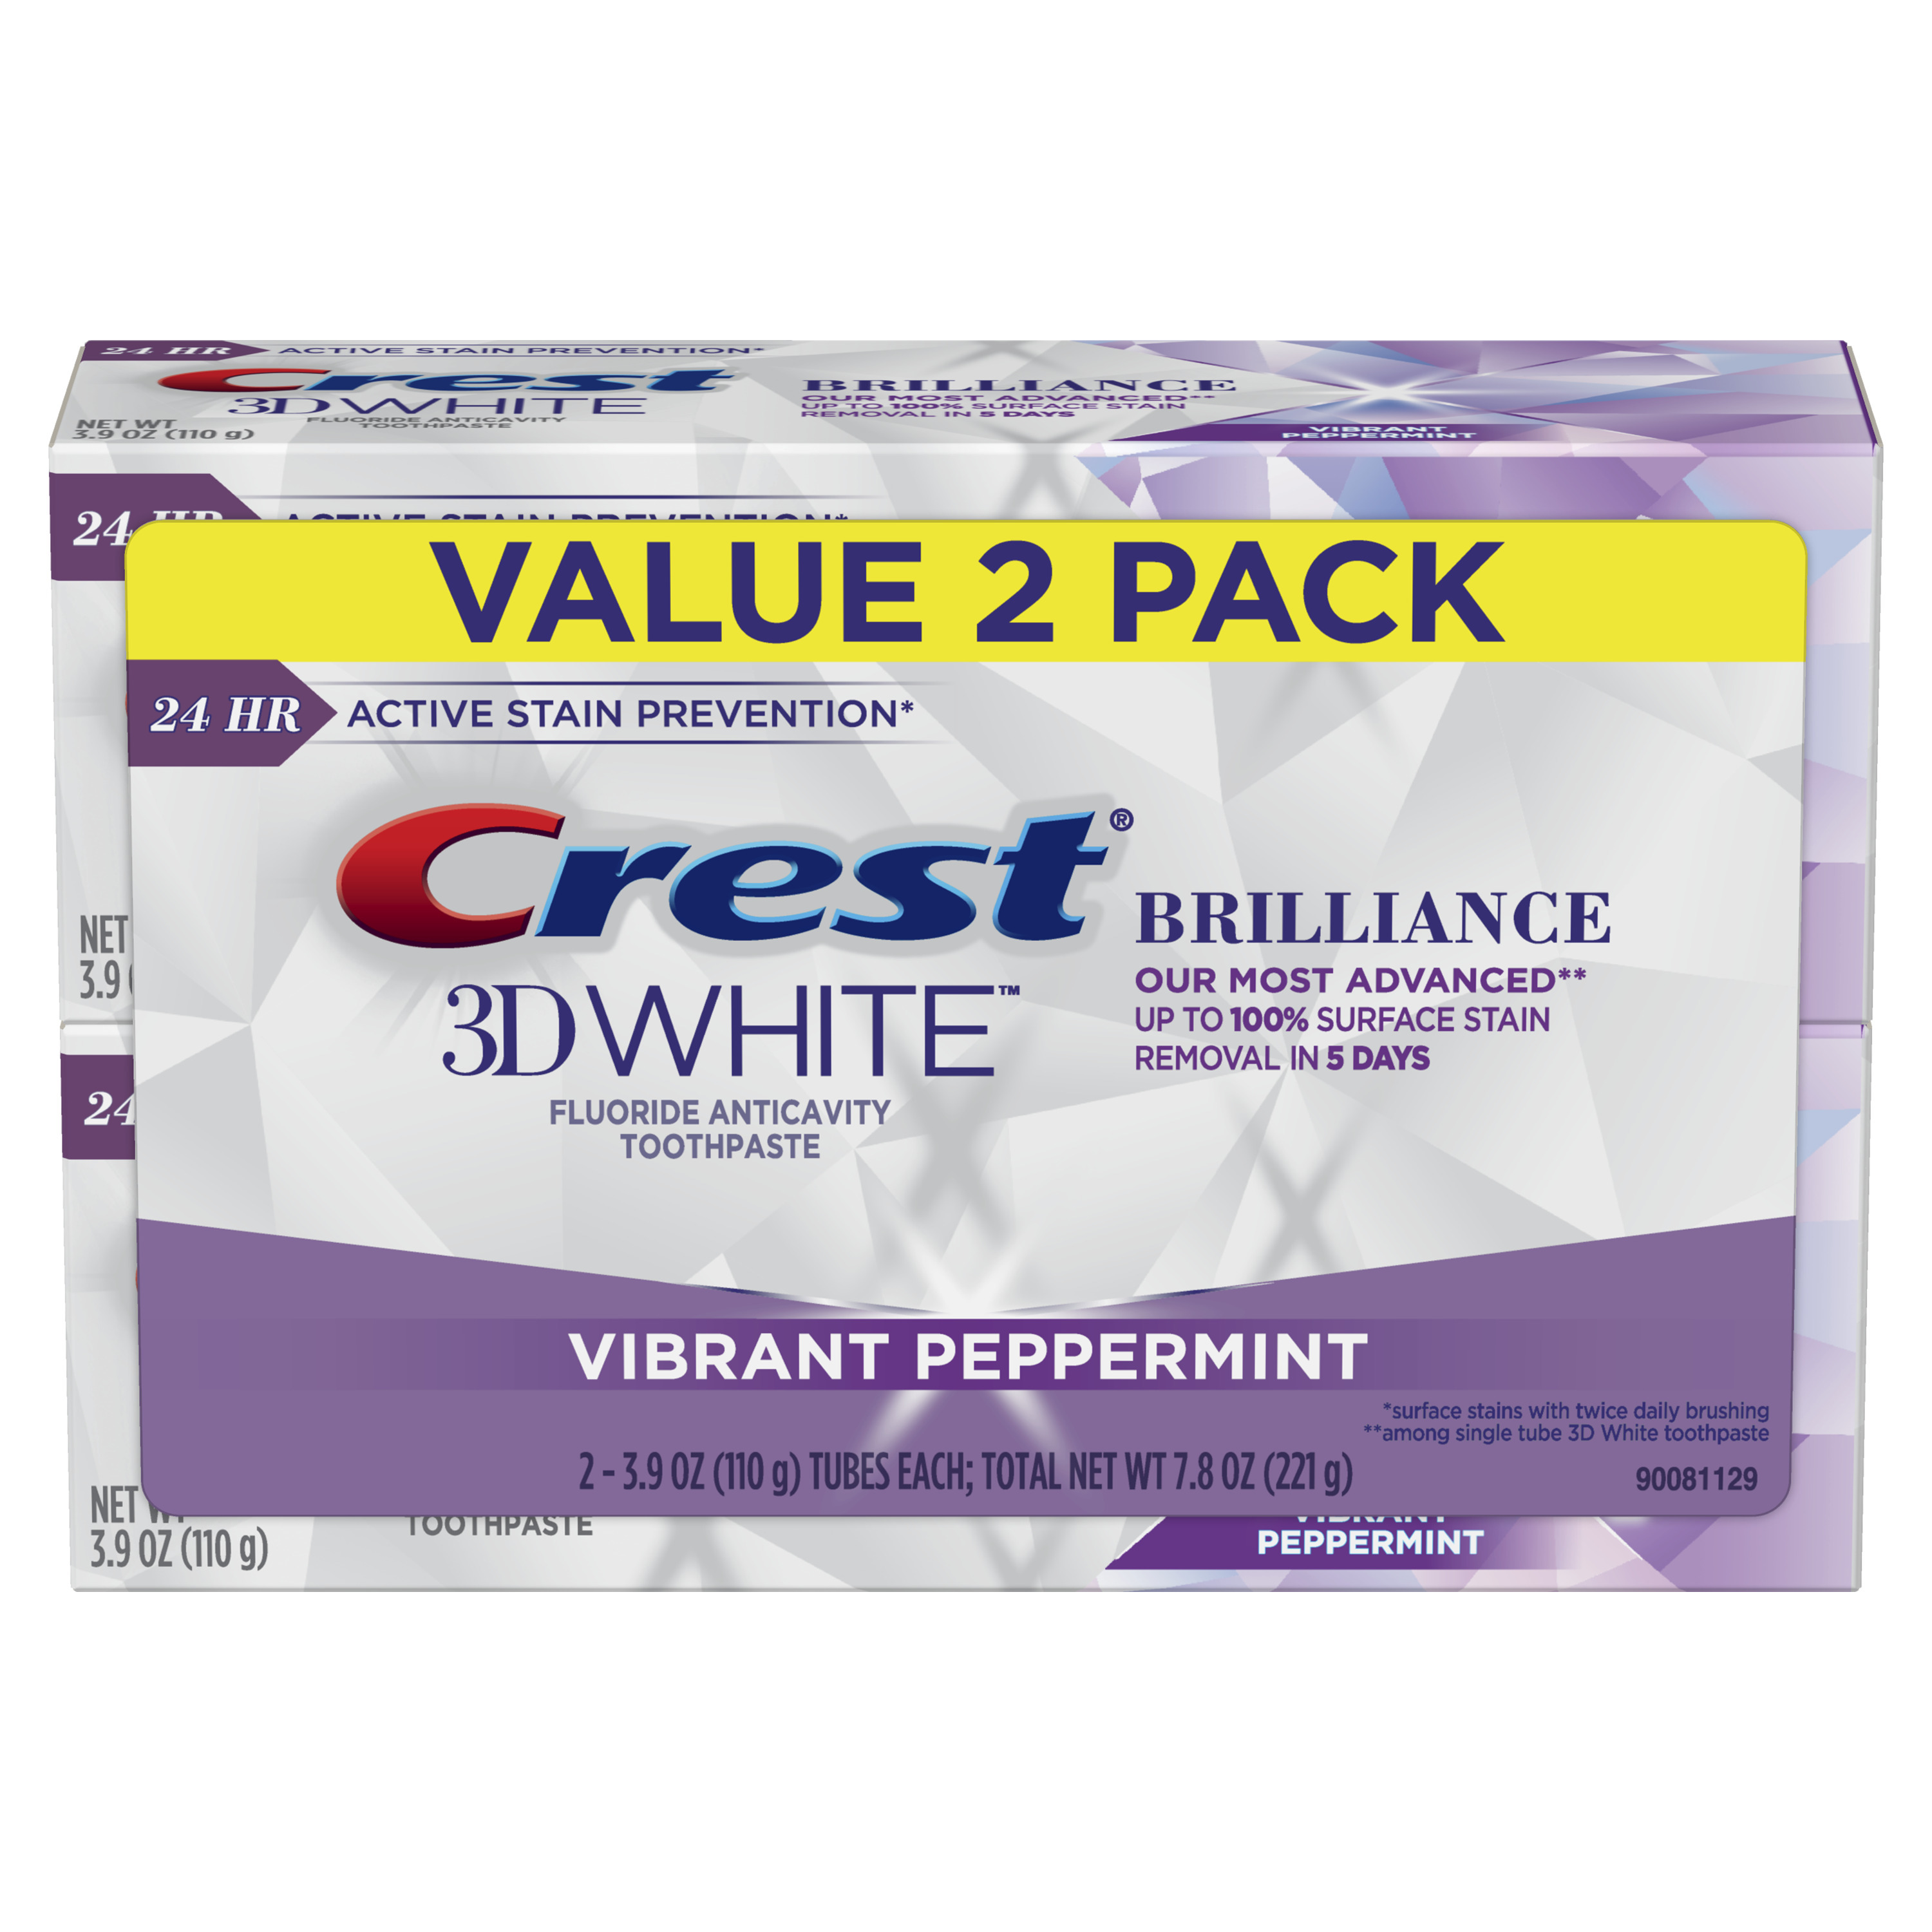 Crest 3D White Brilliance Toothpaste, Vibrant Peppermint, 3.9 oz, Pack of 2 - image 1 of 10